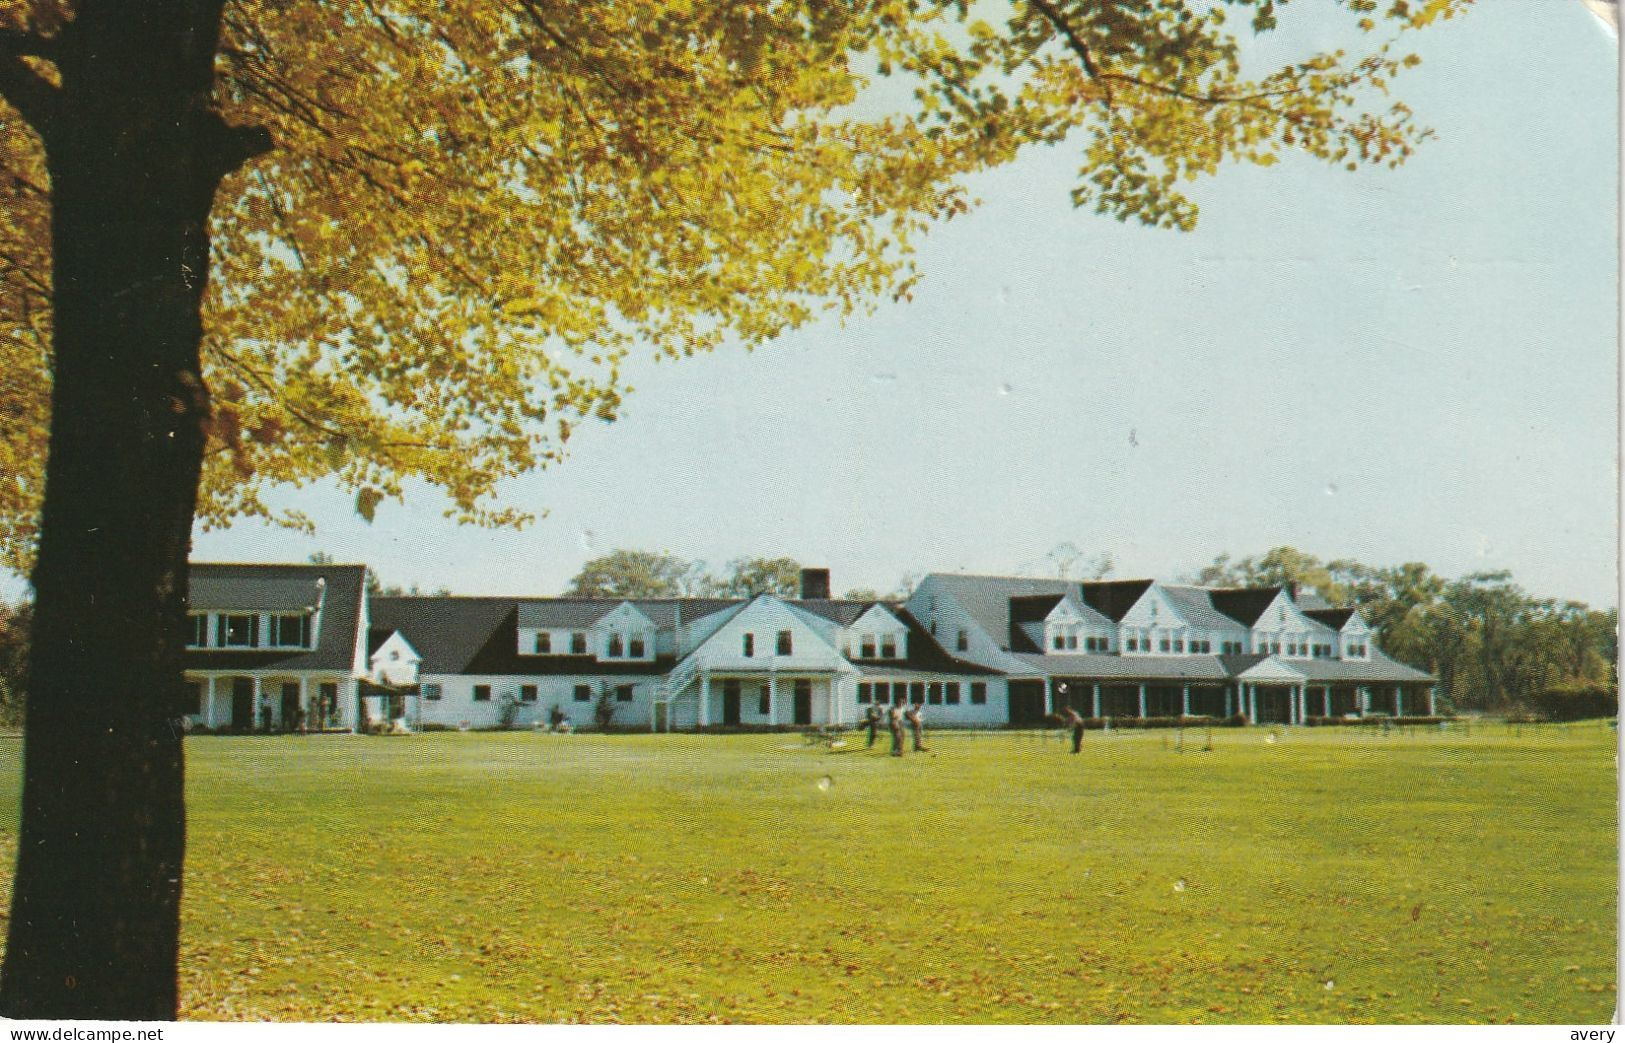 Manchester, New Hampshire  Manchester Country Club - Manchester